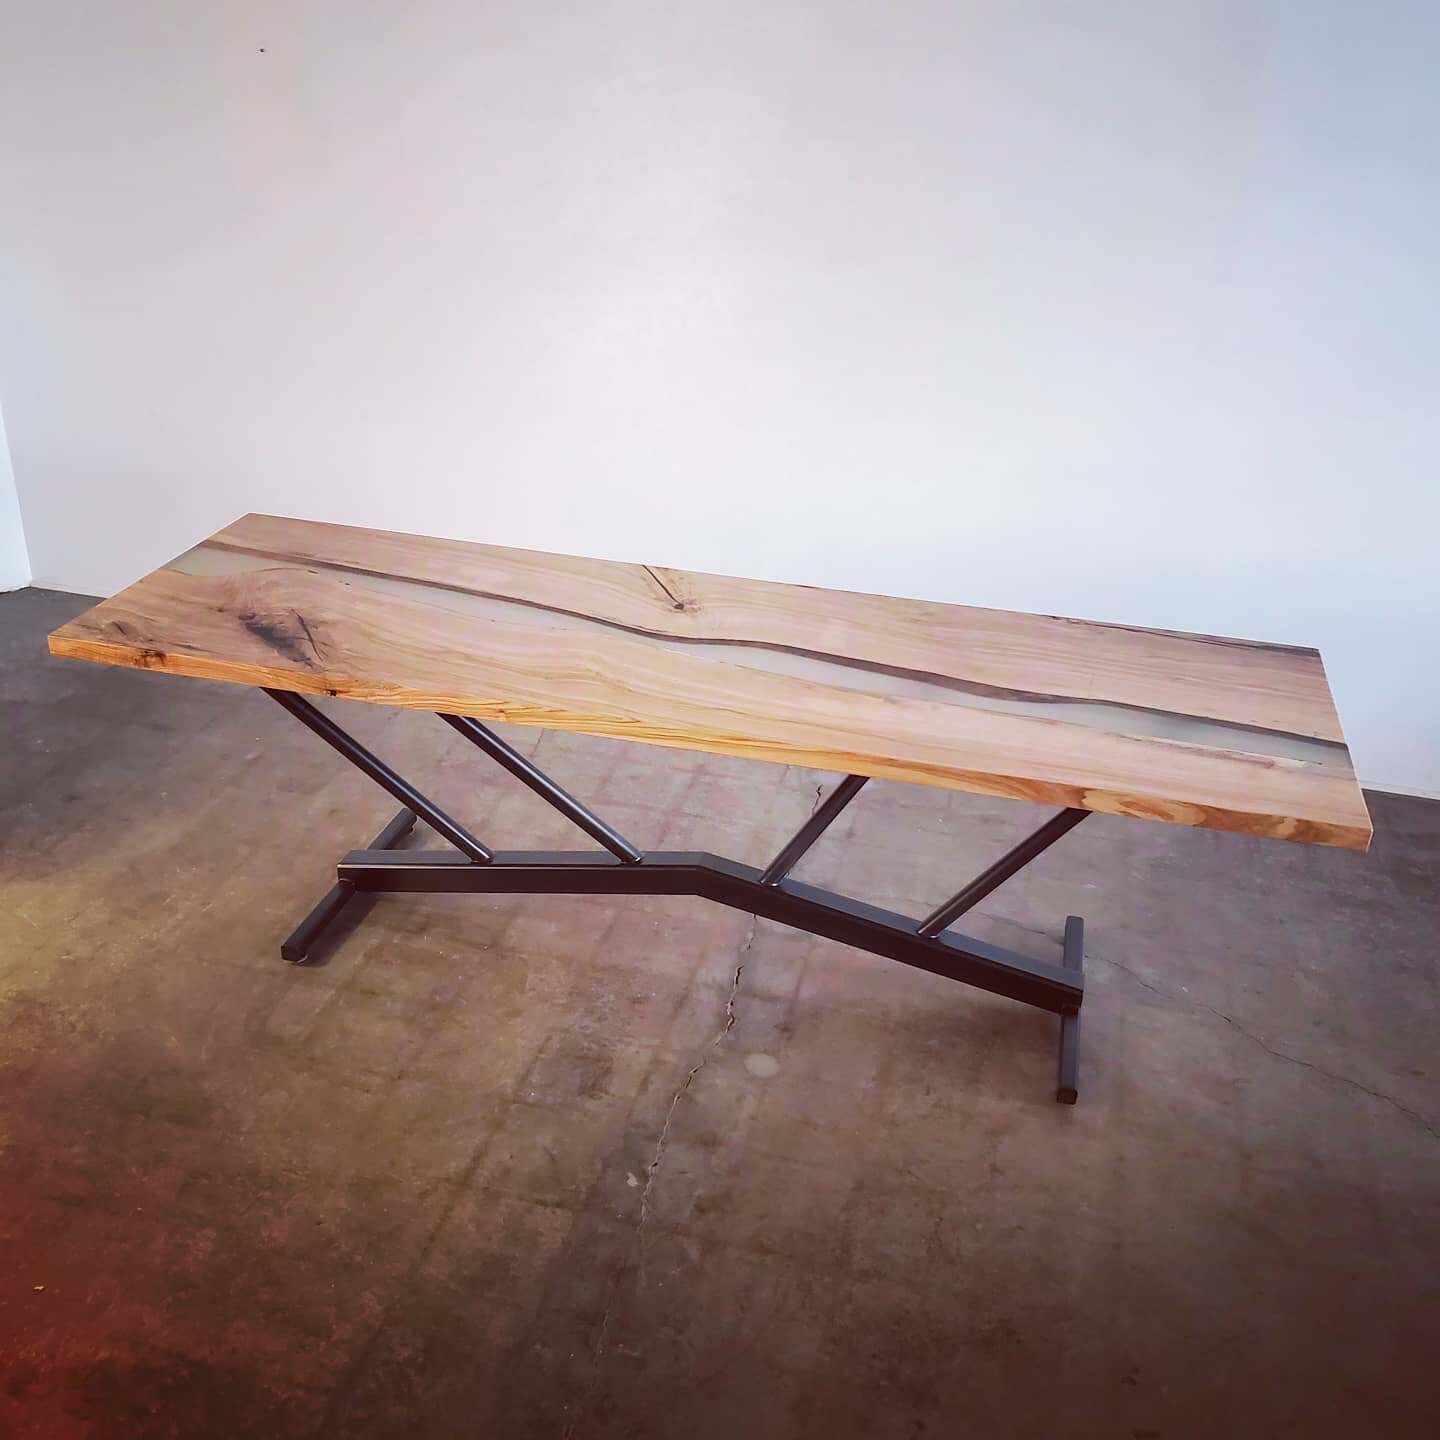 Ash table with resin center fill, blackened steel &quot;bridge&quot; trestle base.